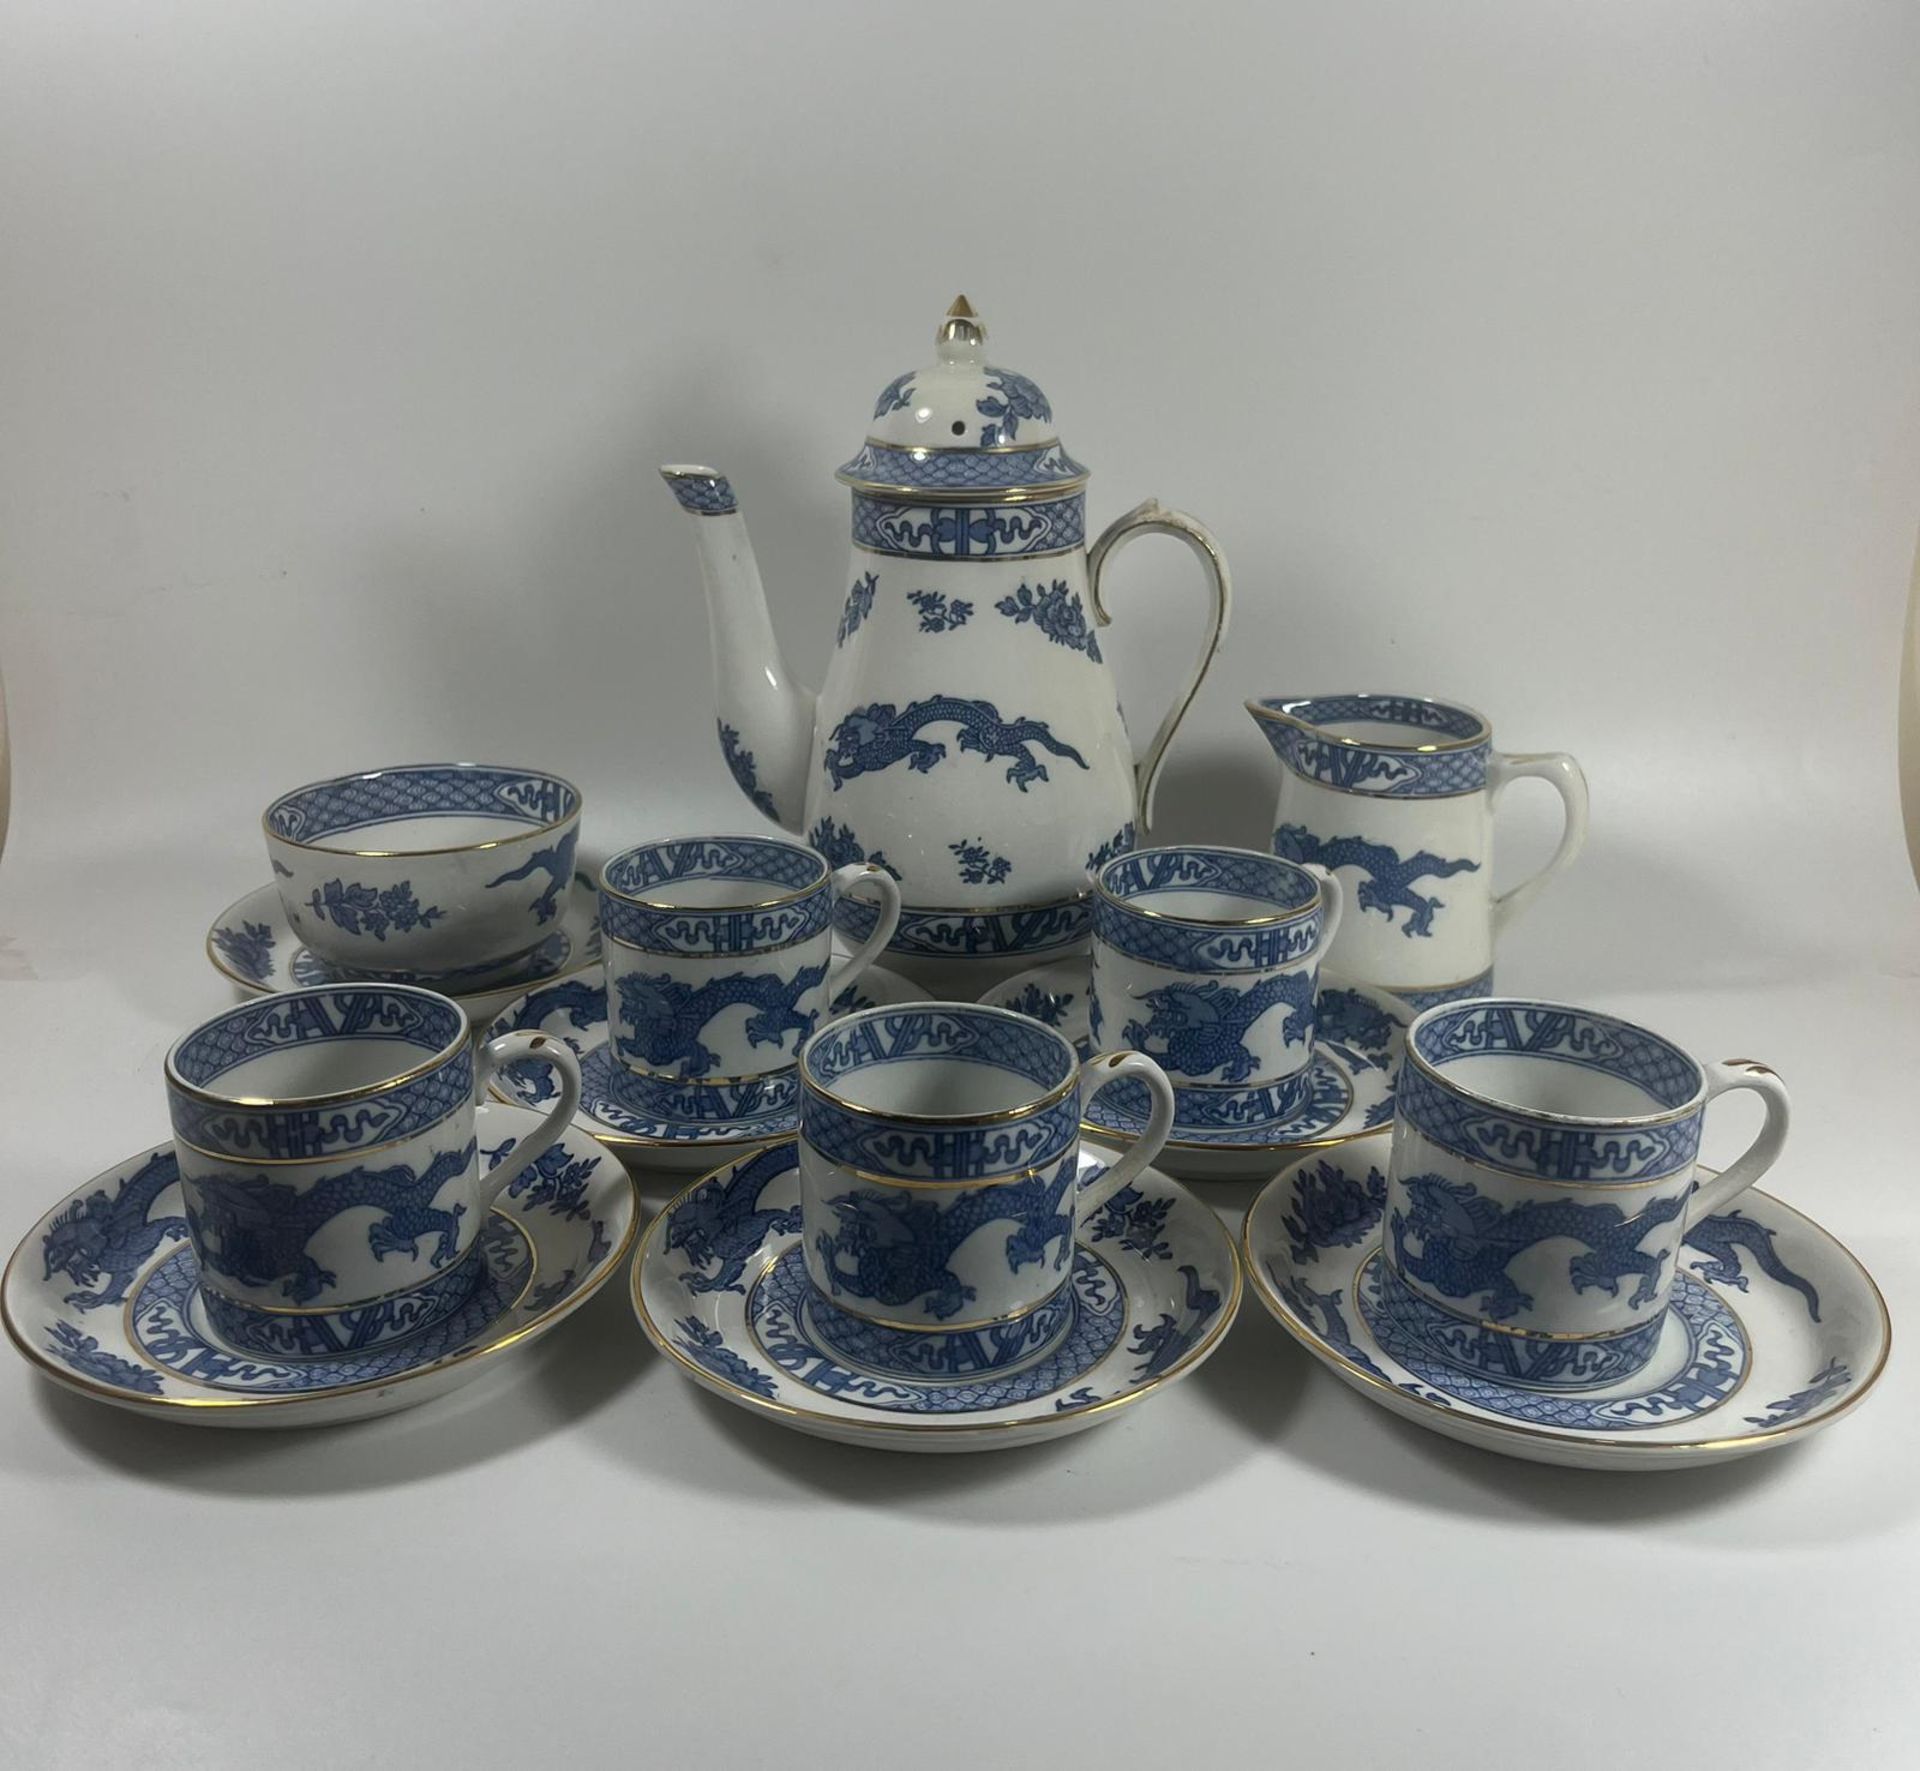 AN ART DECO 1920S BOOTHS BLUE AND WHITE DRAGON PATTERN TEA SET, TEAPOT HEIGHT 19 CM - Image 5 of 6